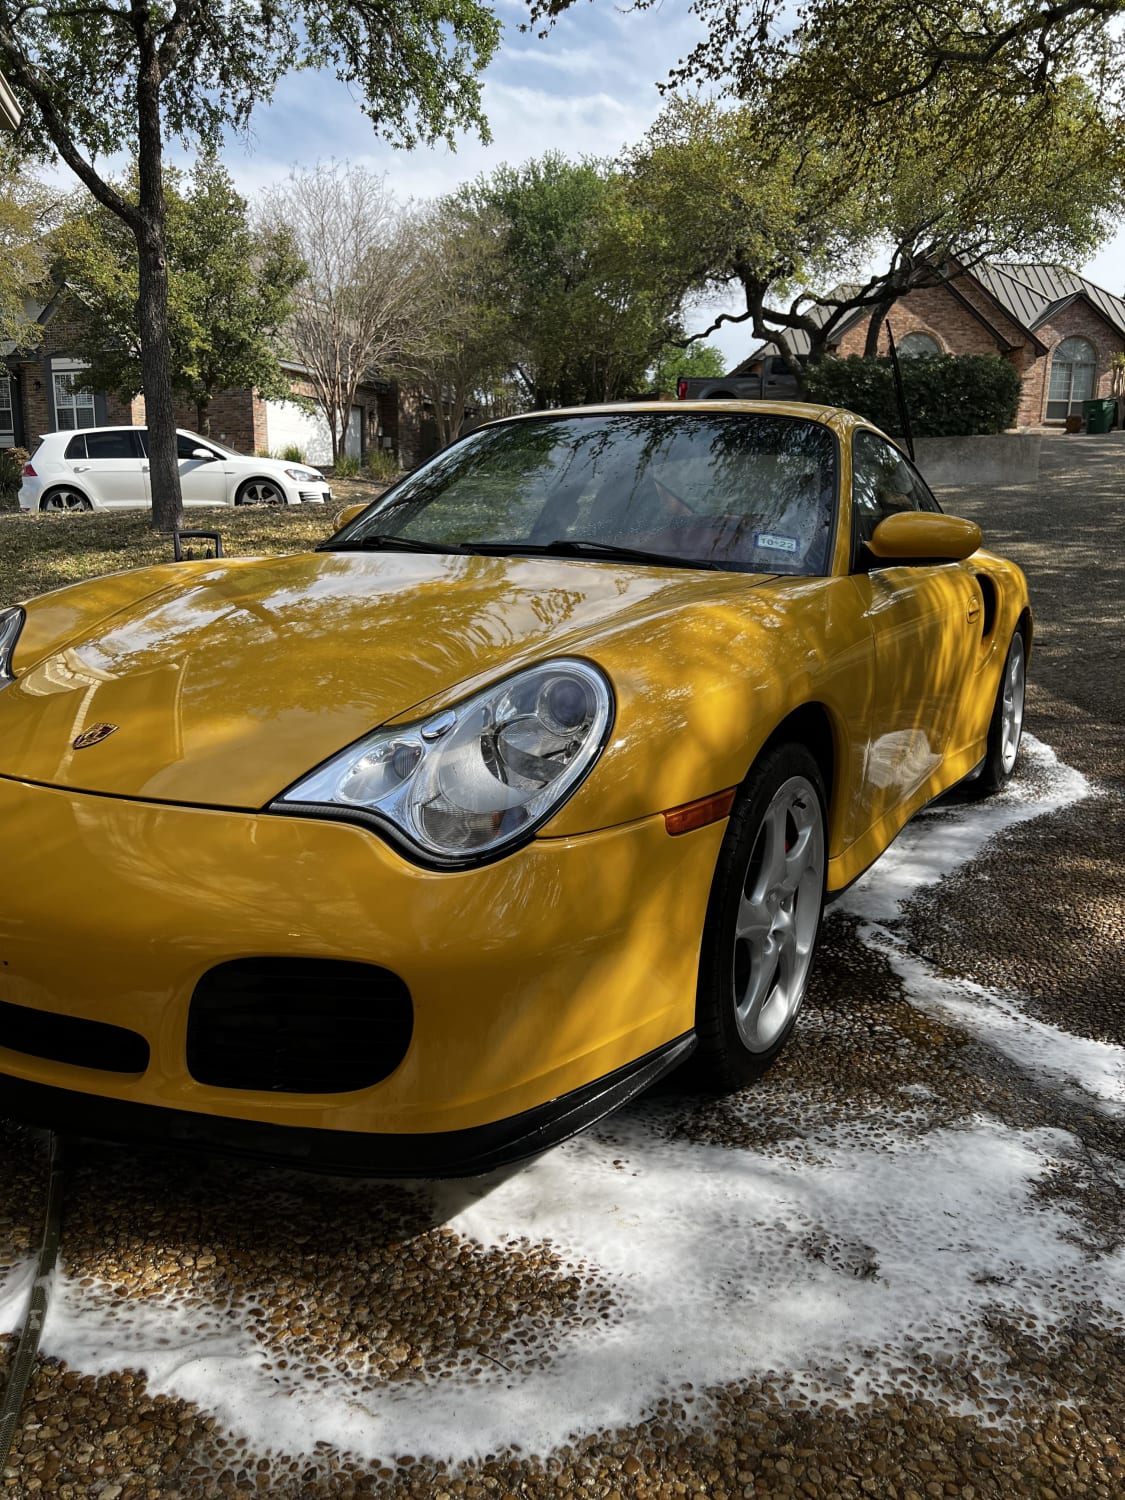 Speed yellow with boxster red interior! Ronald McDonald spec.